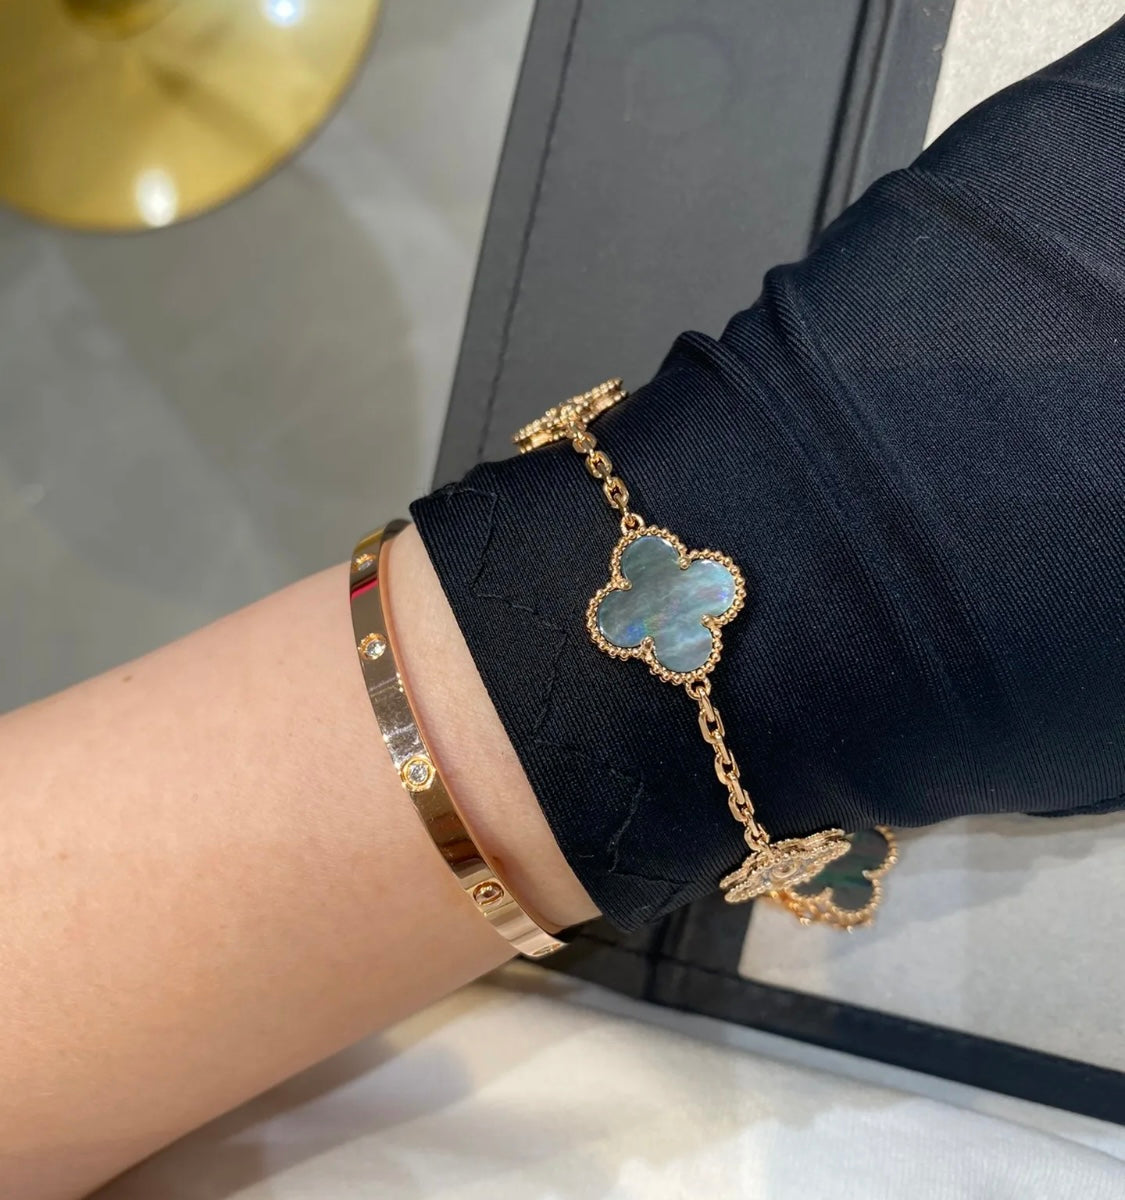 Fasion High-Quality four-leaf Clover Bracelet. Perfect for Mother's Day, Birthdays, Anniversary and so much more